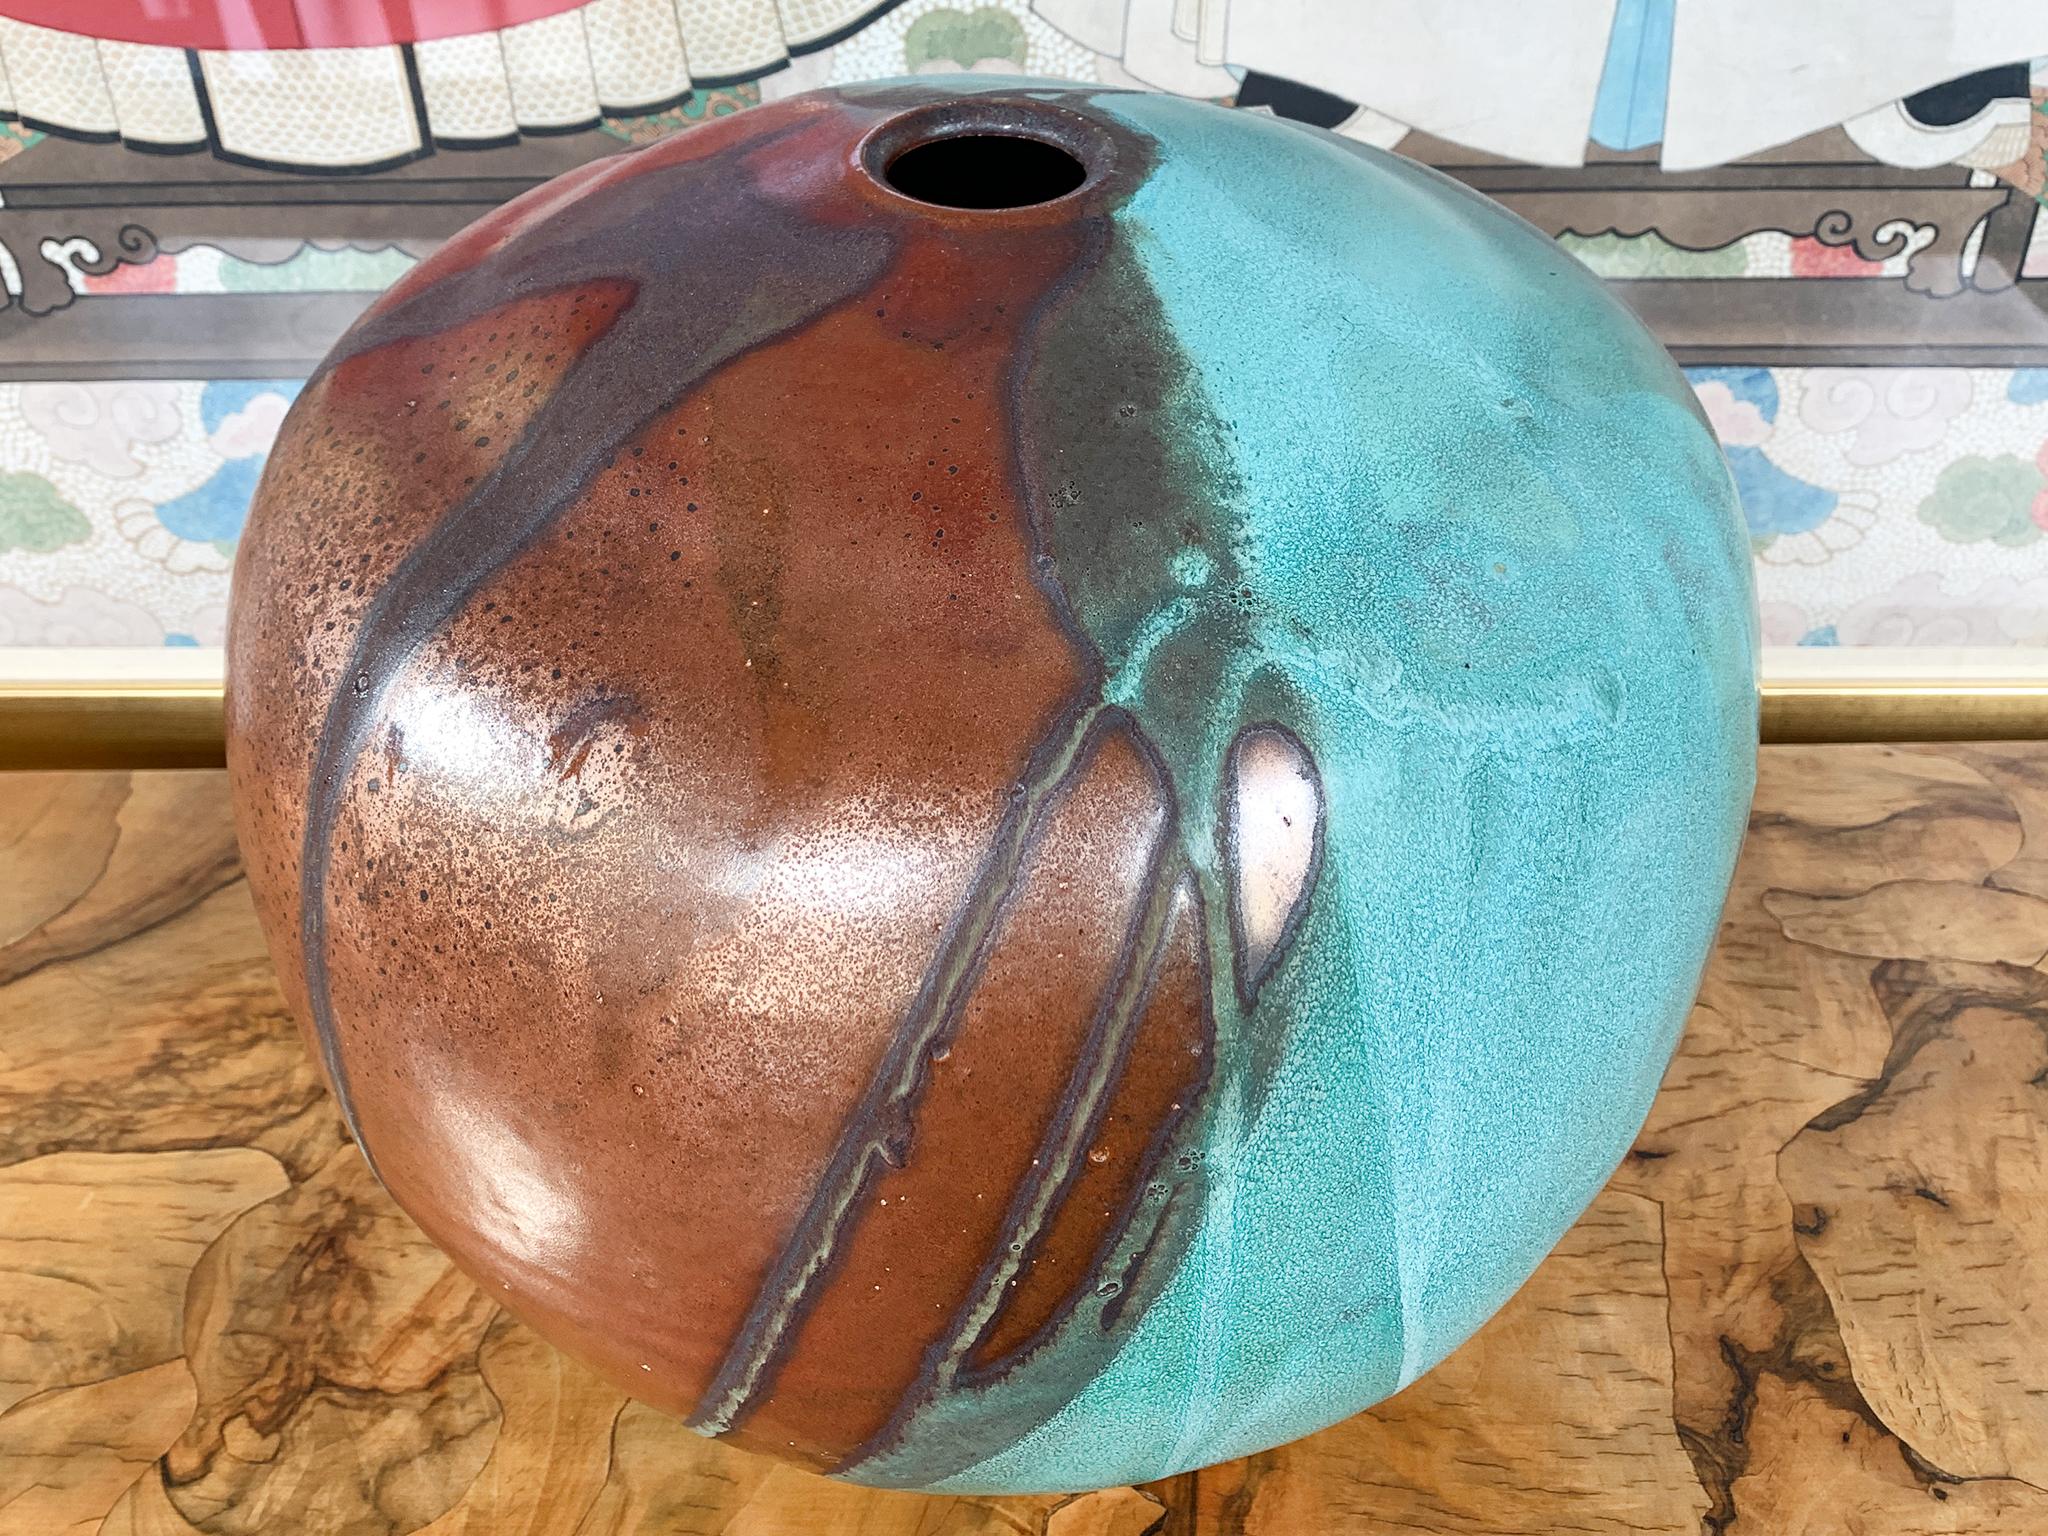 From Thom Lussier's oxidized copper collection - a series of ceramic vessels that stand out for their rich textures and brilliant palette of copper and turquoise. #7 is spherical in form with a small opening.

White stoneware, midfire glaze, cone